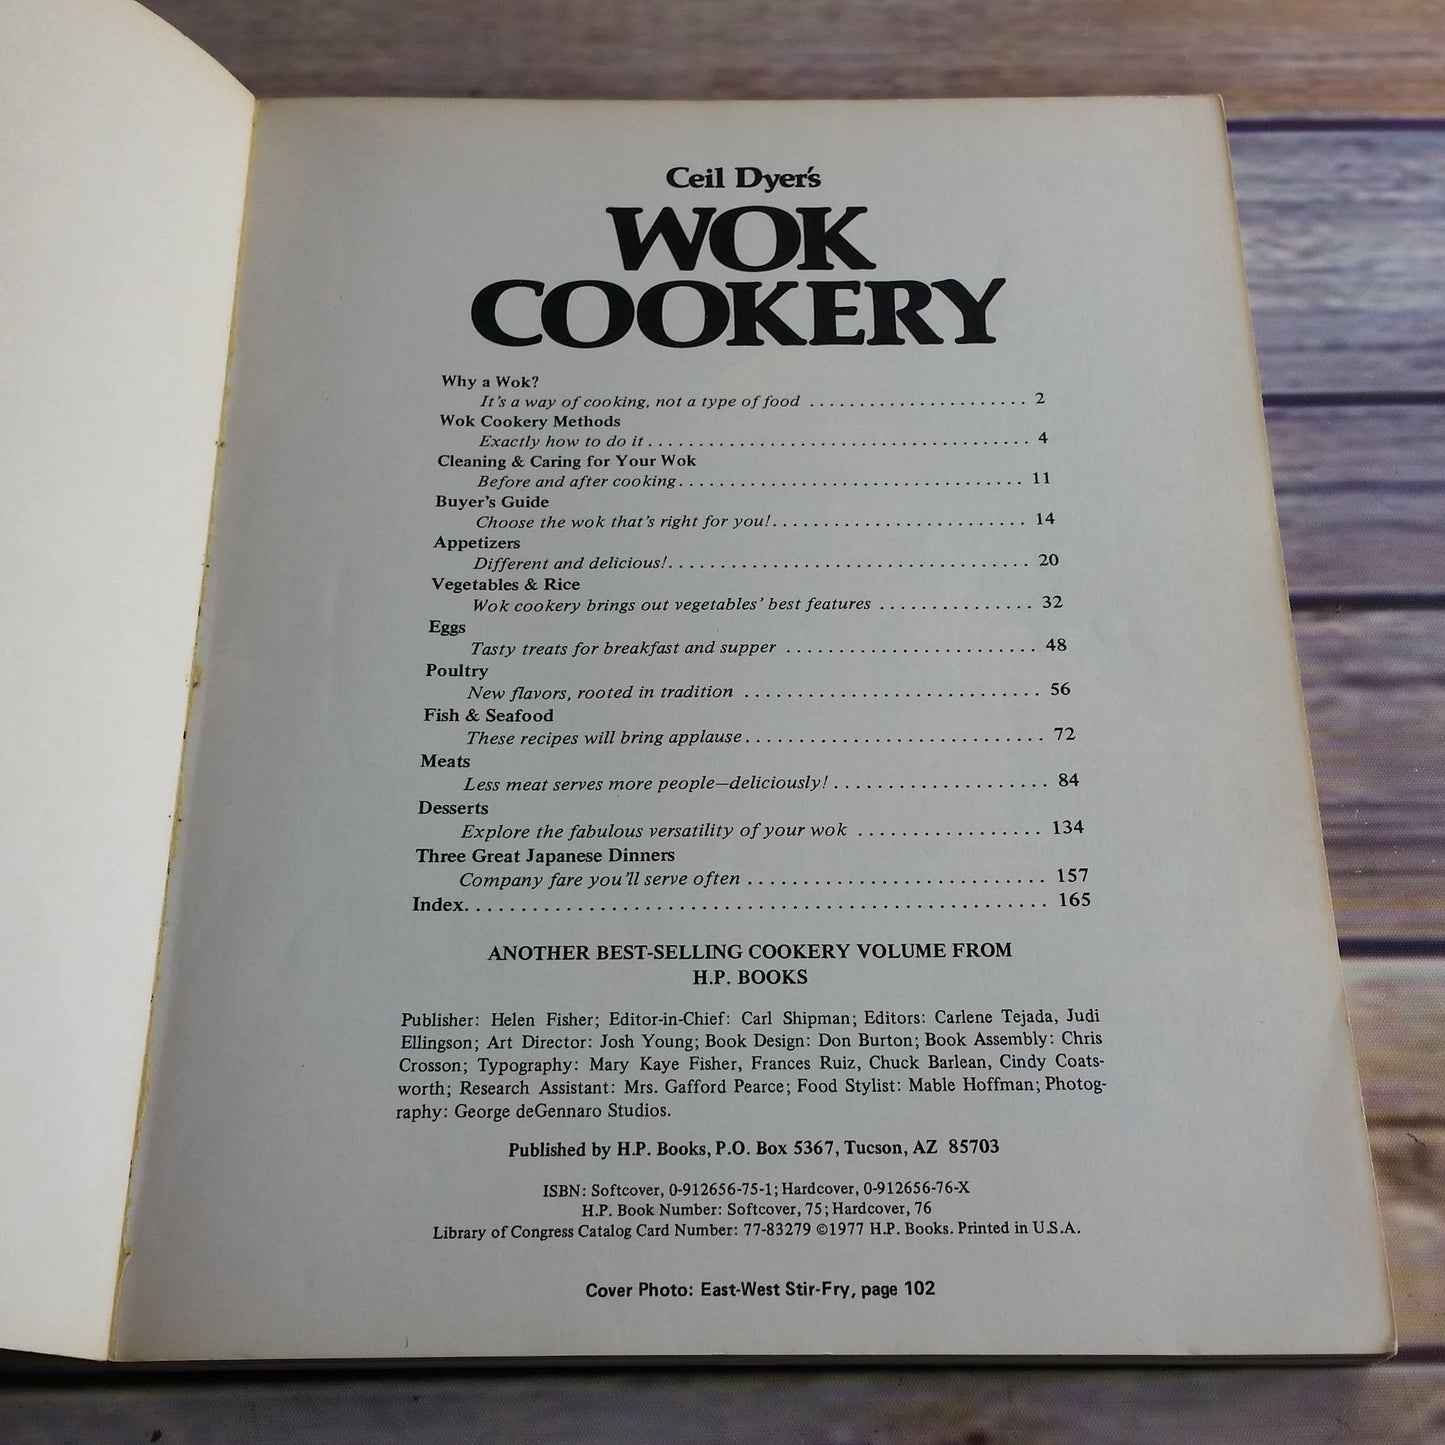 Vintage Cookbook Wok Cookery Recipes 1977 HP Books Ceil Dyer Paperback Methods Cleaning Care Buyer Guide Appetizers Poultry Seafood Desserts